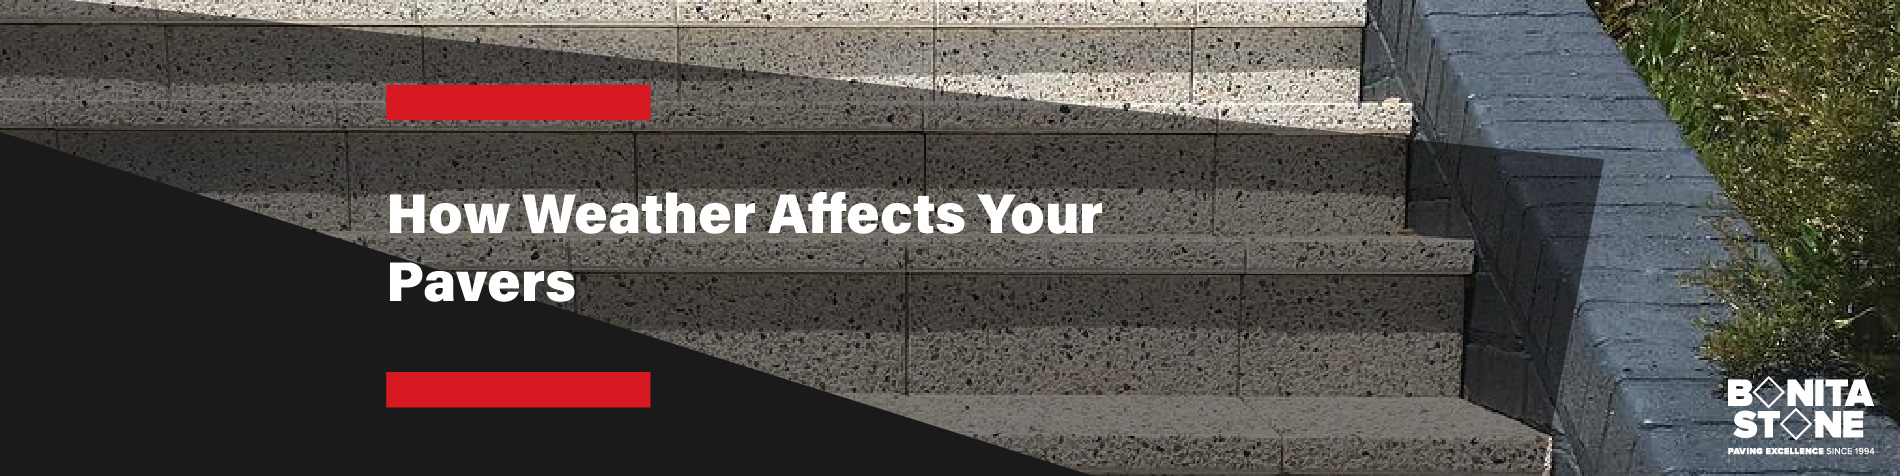 how-weather-affects-your-pavers-banner